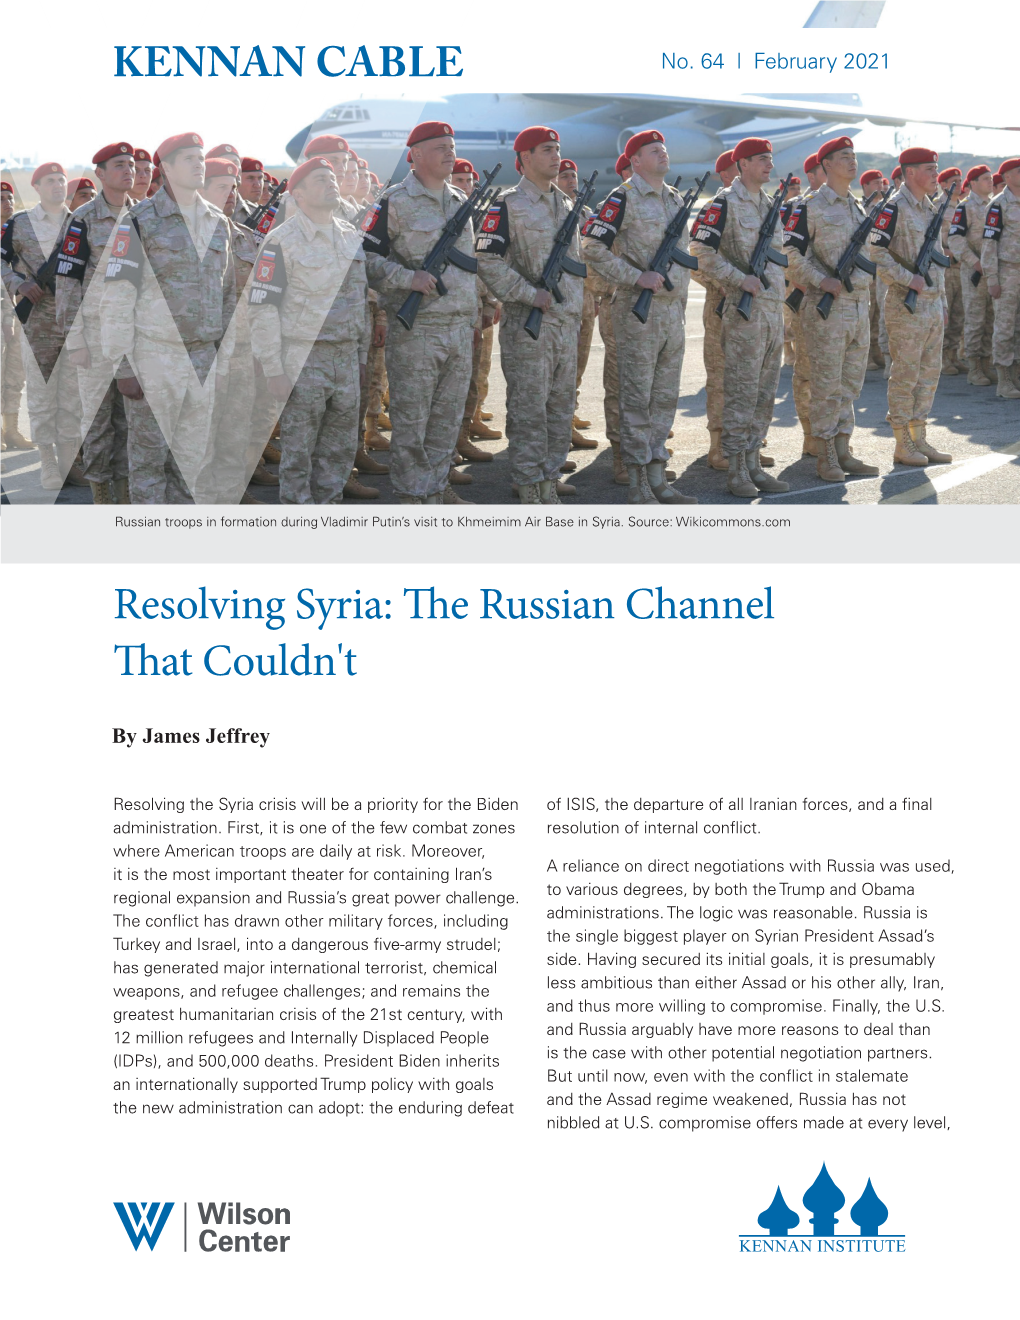 Resolving Syria: the Russian Channel That Couldn't